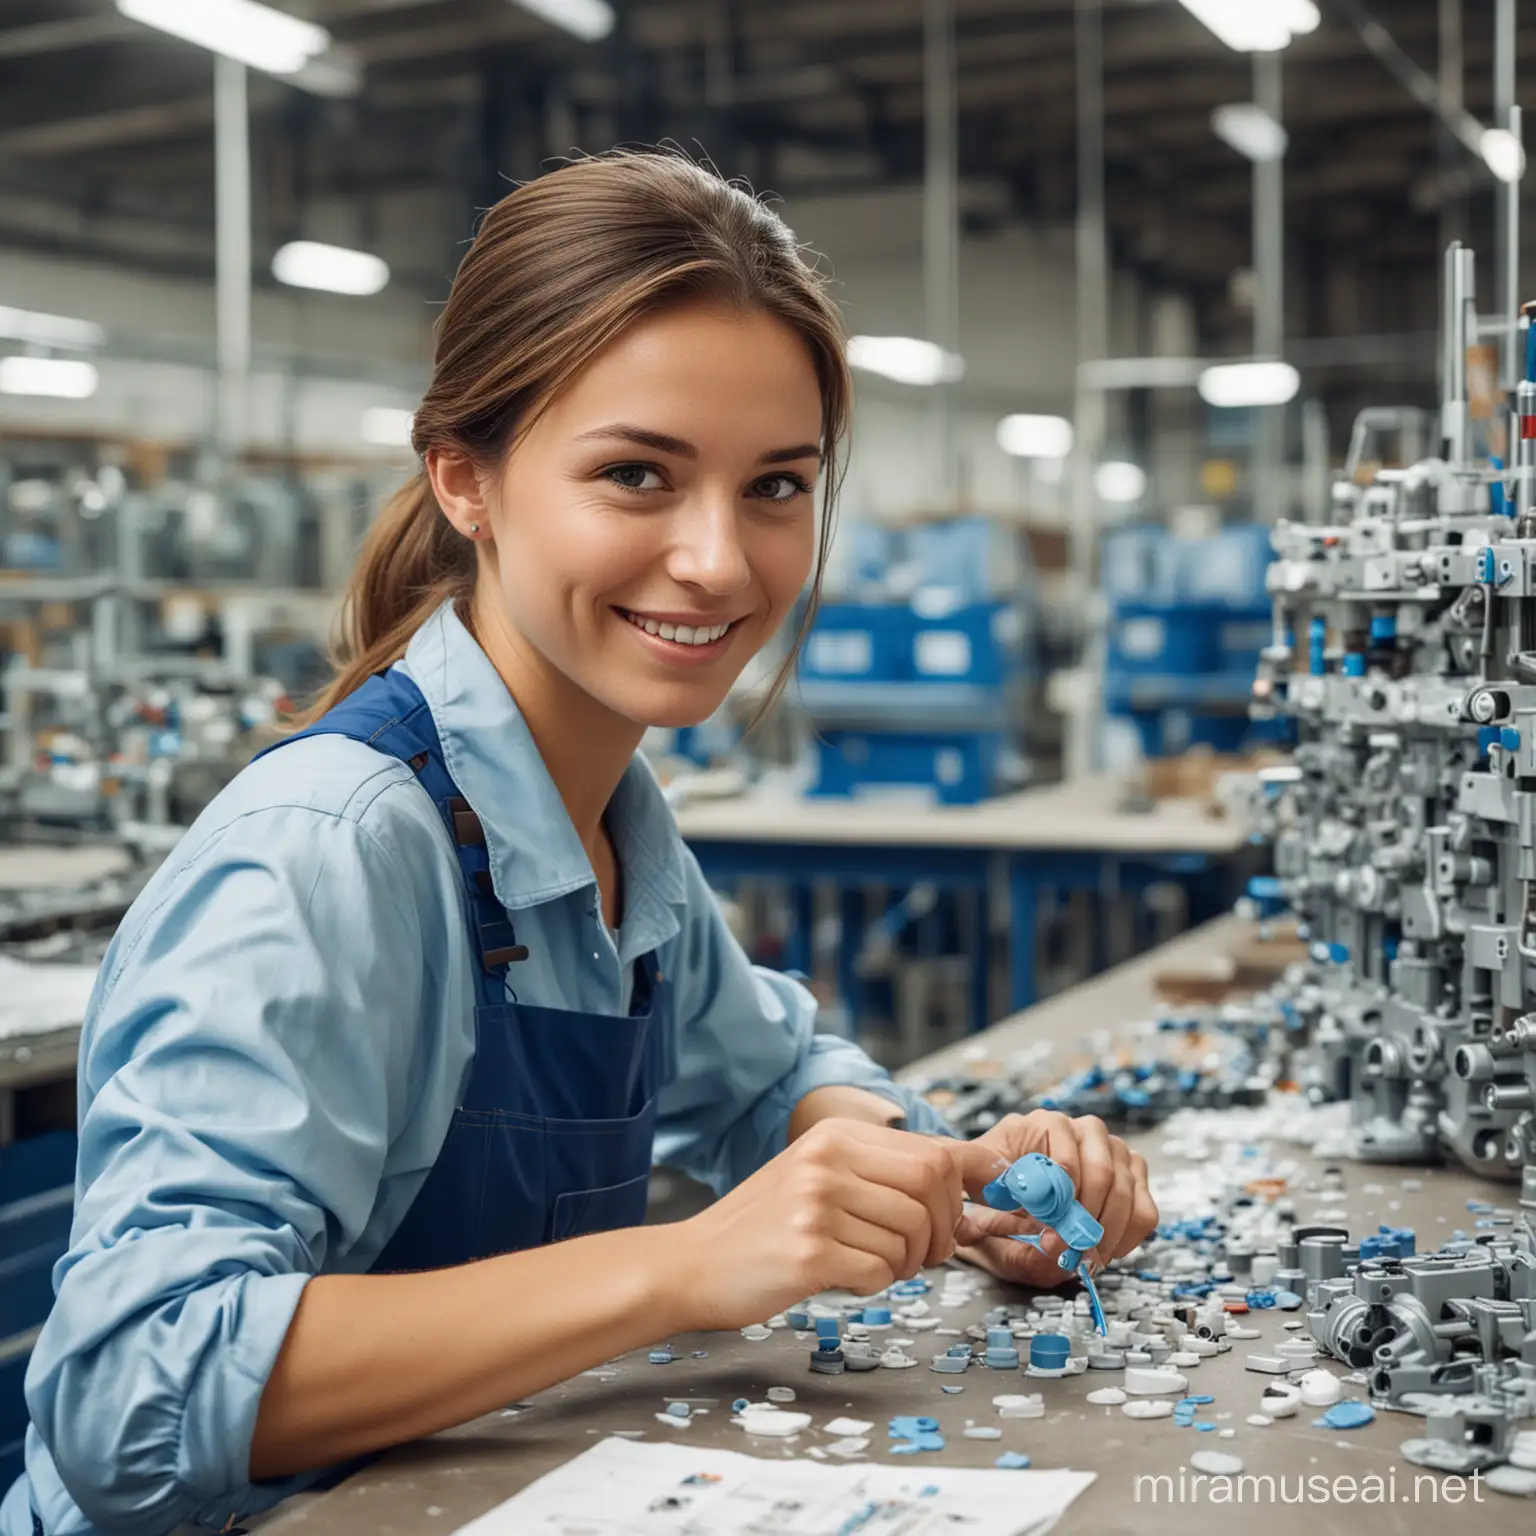 Caucasian Woman Assembling Miniature Plastic Parts in Factory with a Content Smile